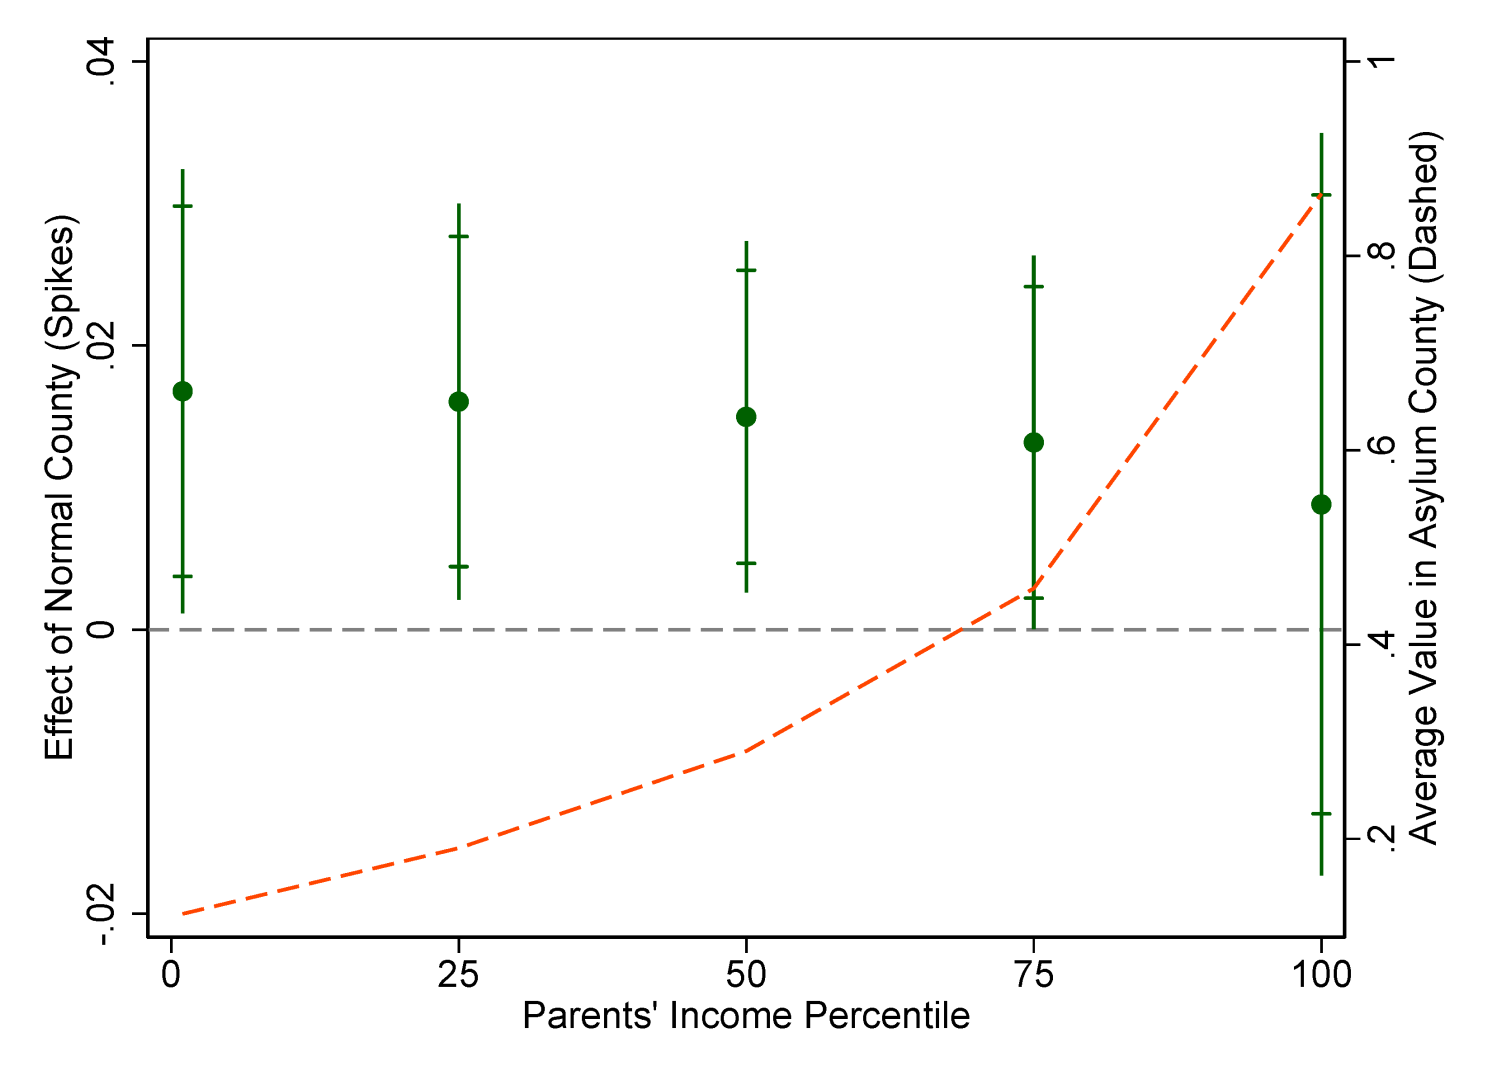 Figure 1 Effect of a normal school on fraction with at least a four-year college degree, aged 25 and over